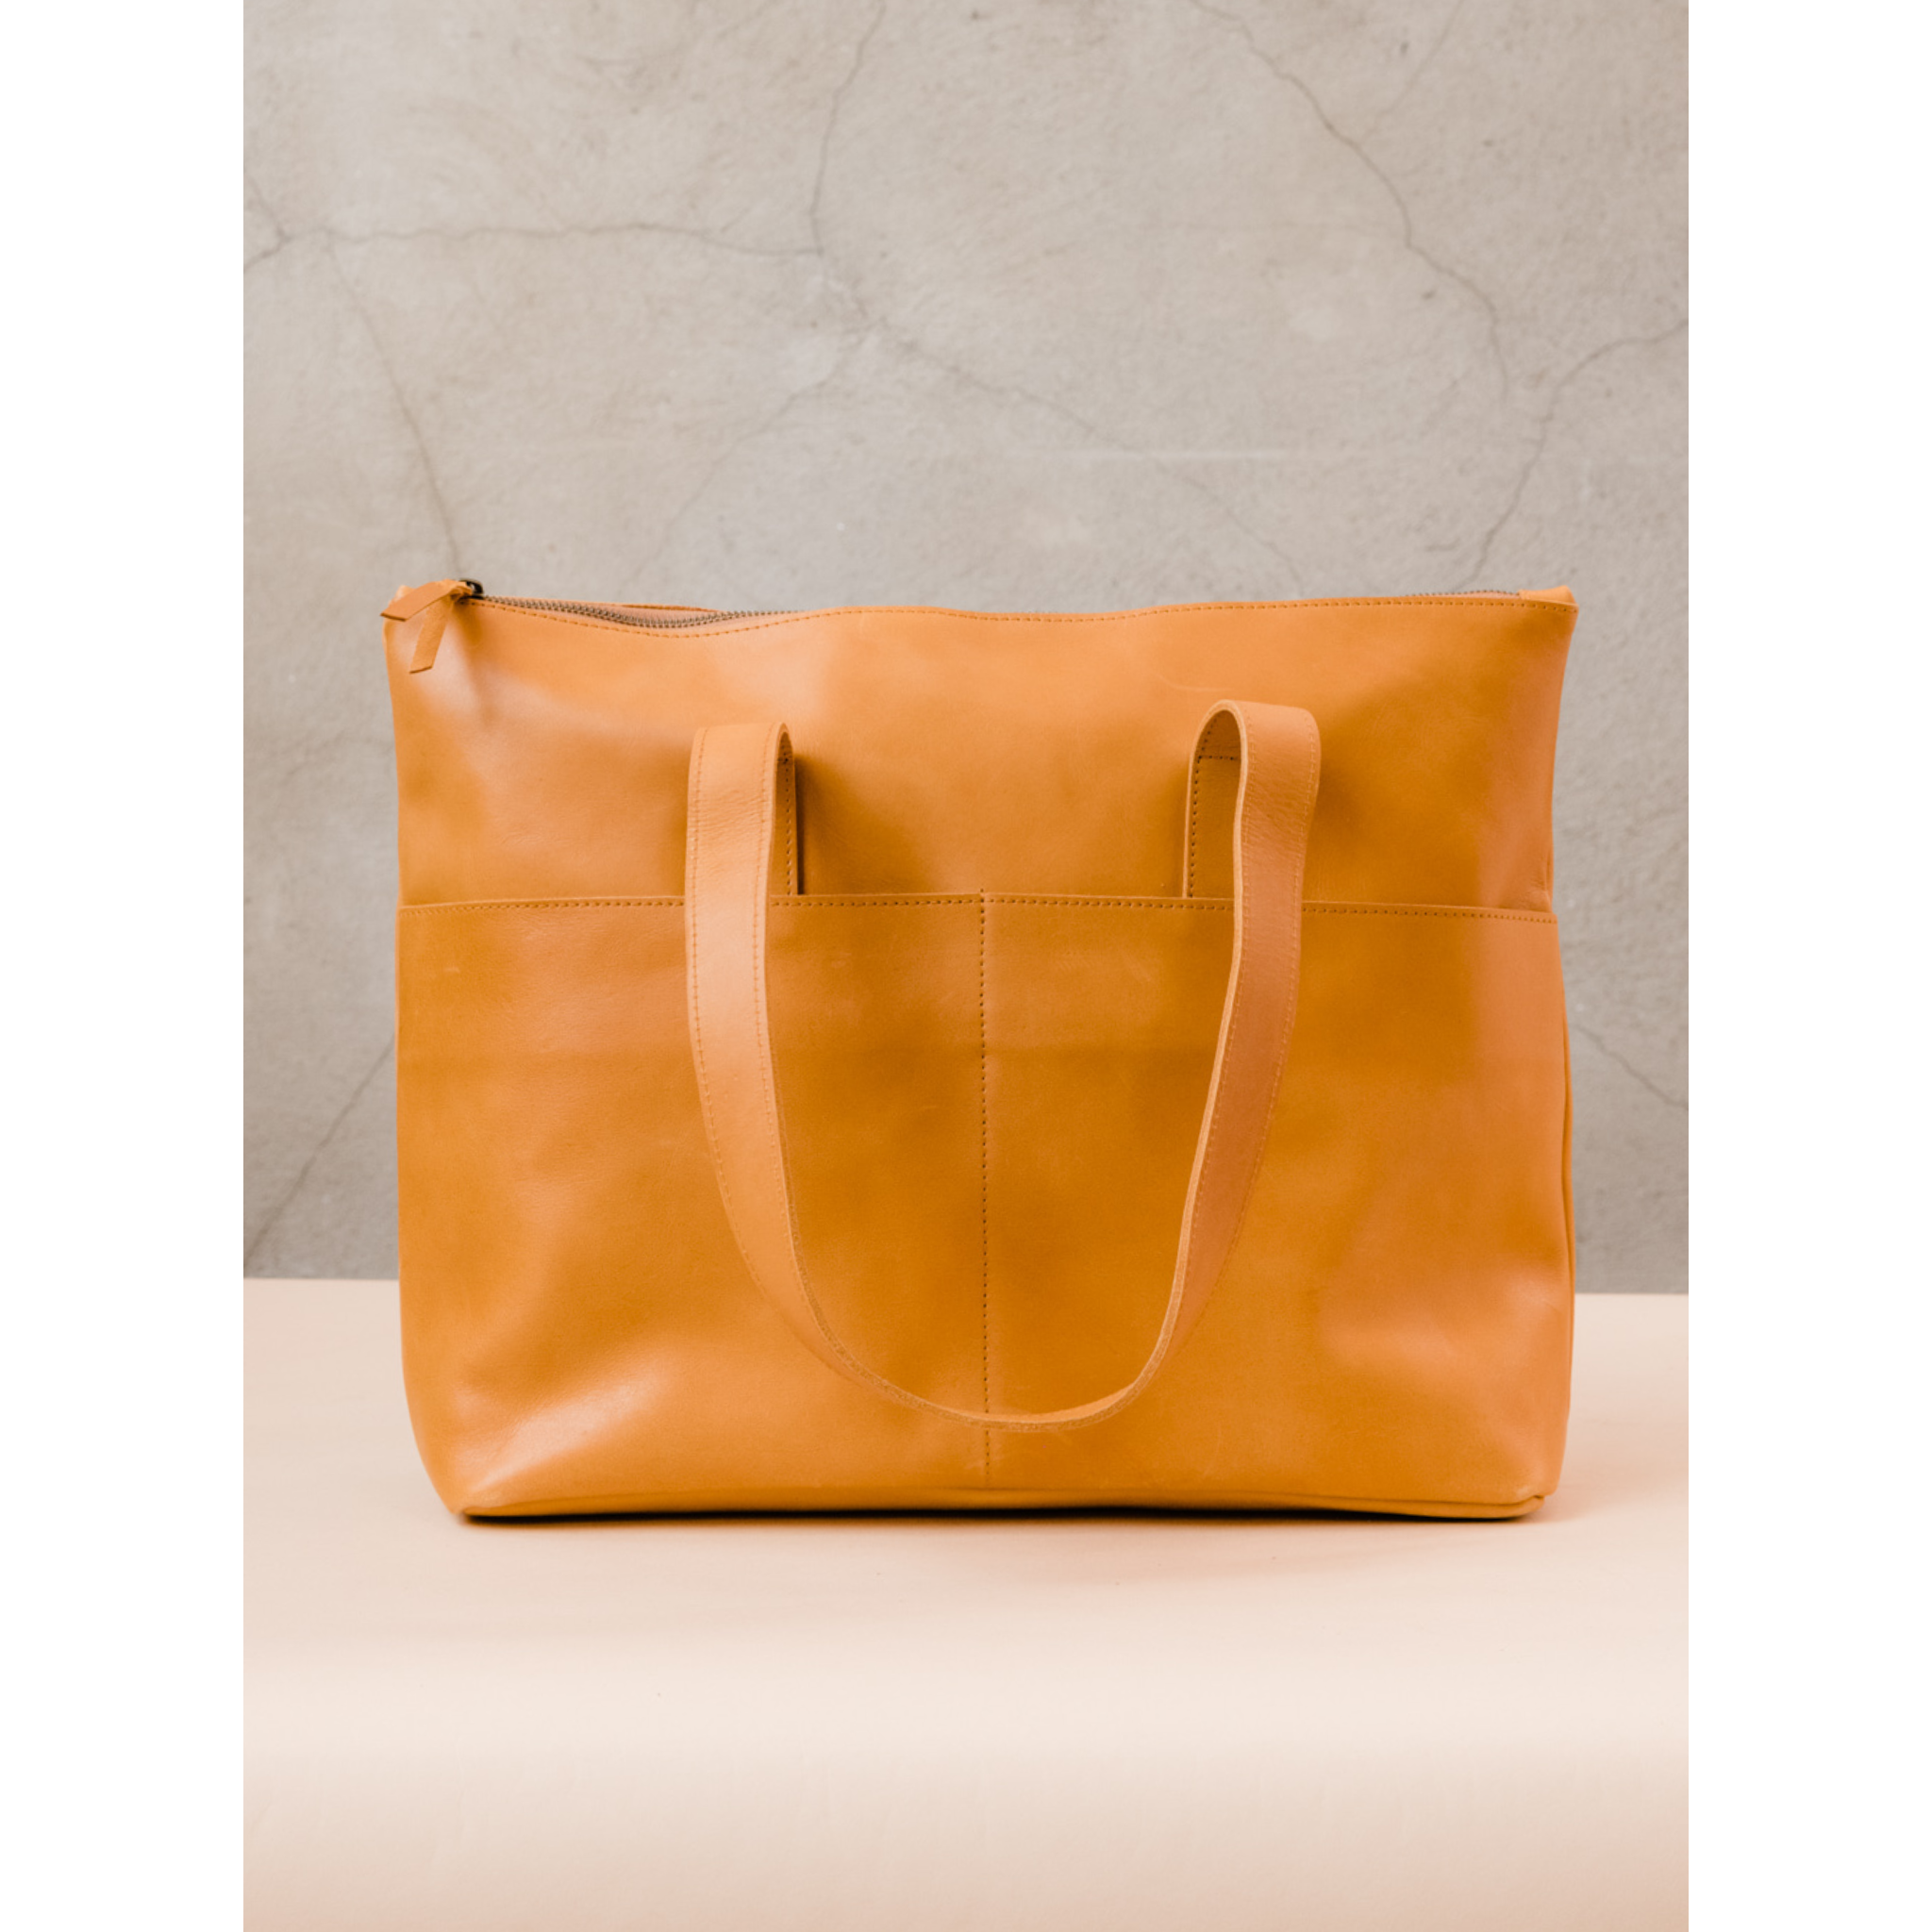 Yari Carry-On Tote - Cognac (Local Pickup/Local Delivery Only*)